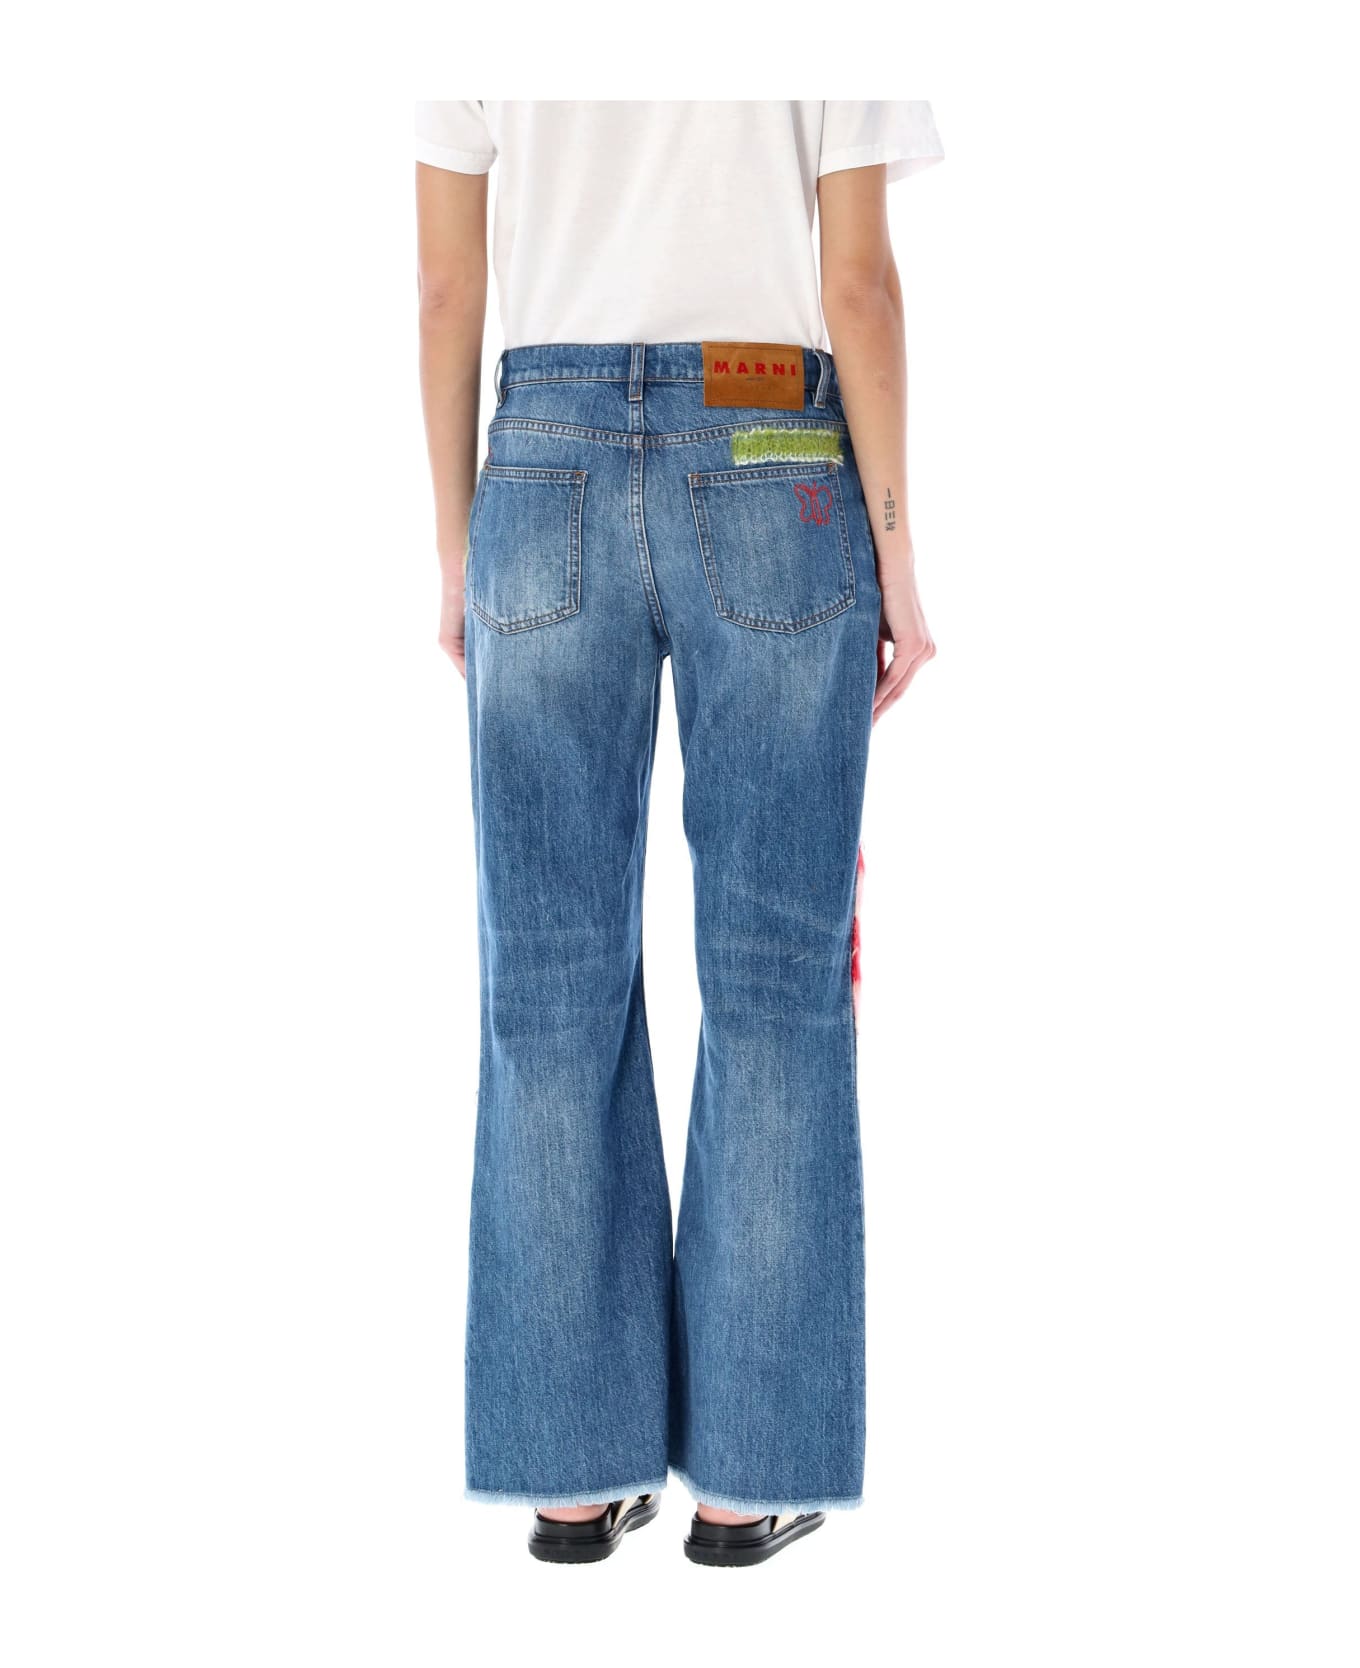 Marni Mohair Patches Jeans - BLUE MIX デニム